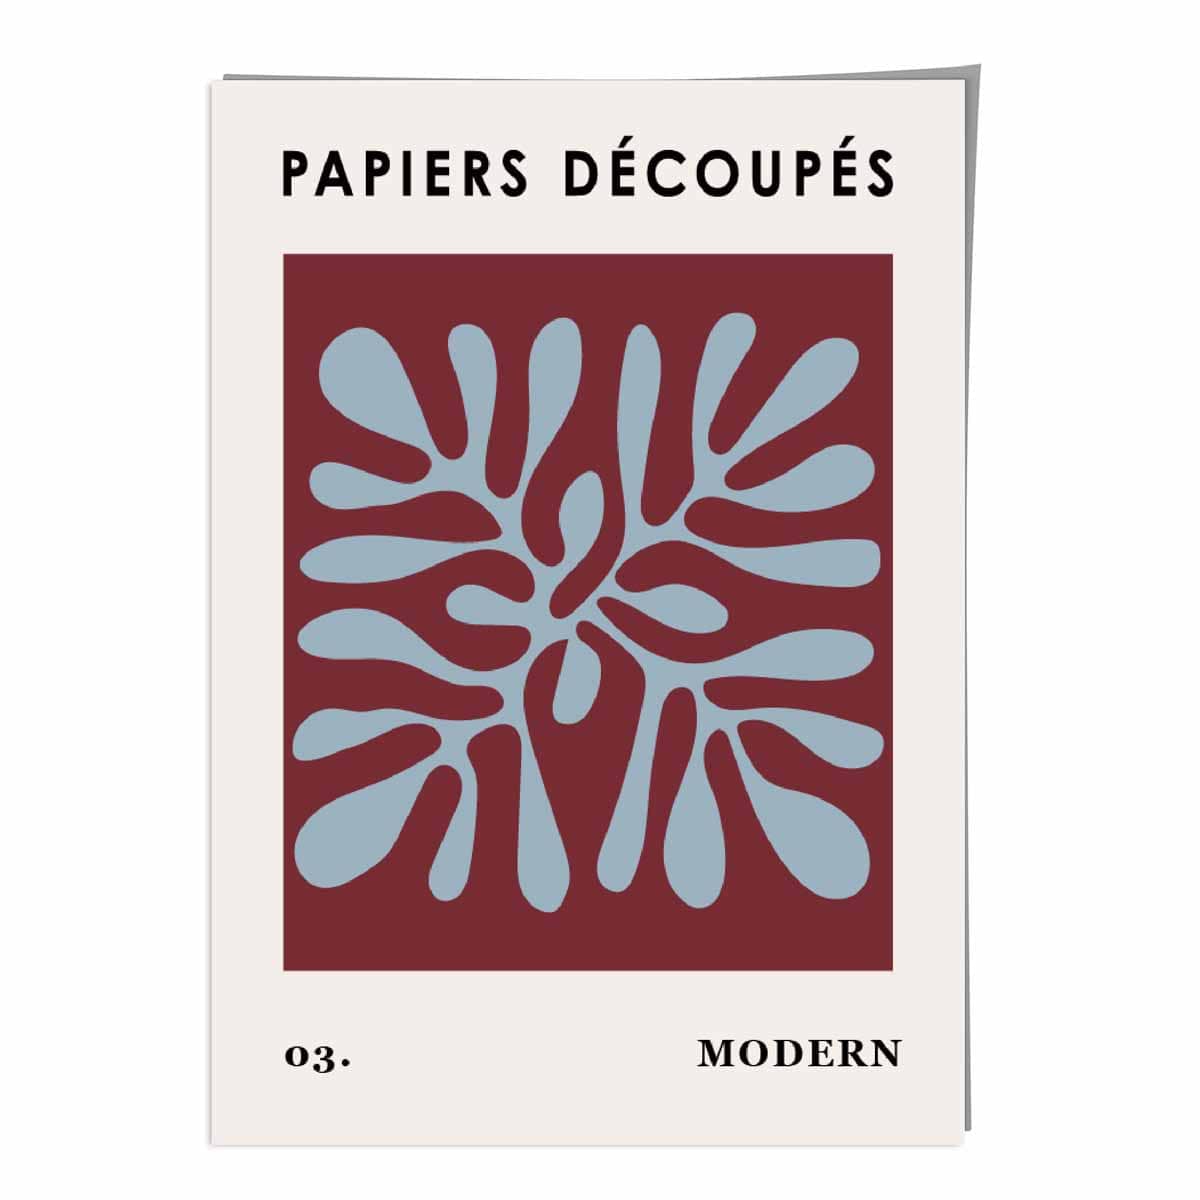 Papiers Decoupes Modern Poster No 3 in Red and Blue